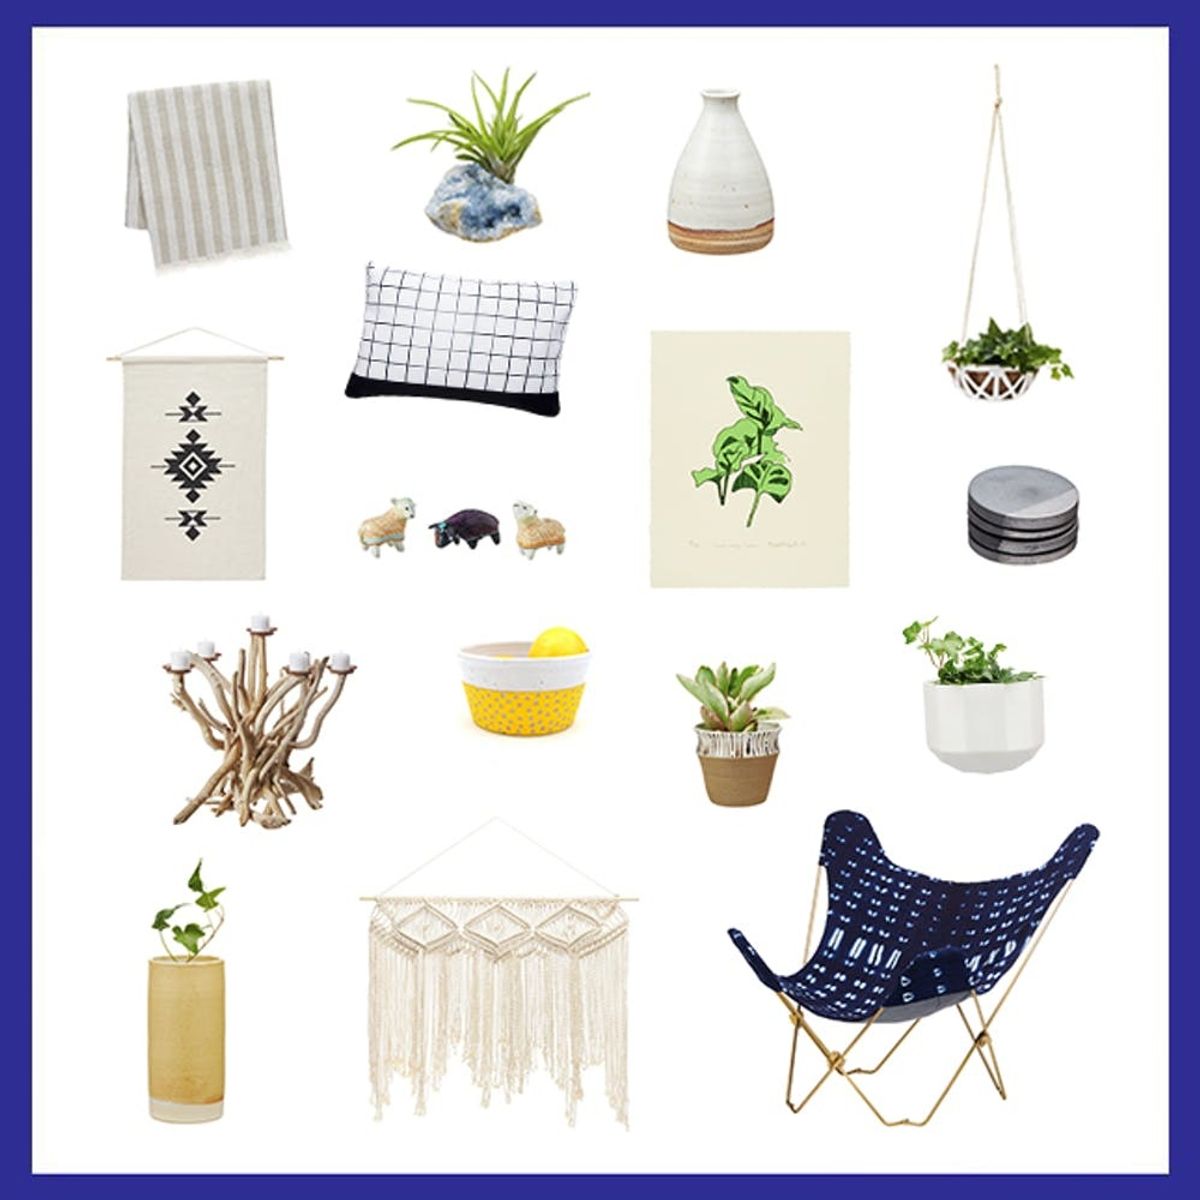 Shop These Home Decor Picks from Etsy’s Brand-New Lookbook